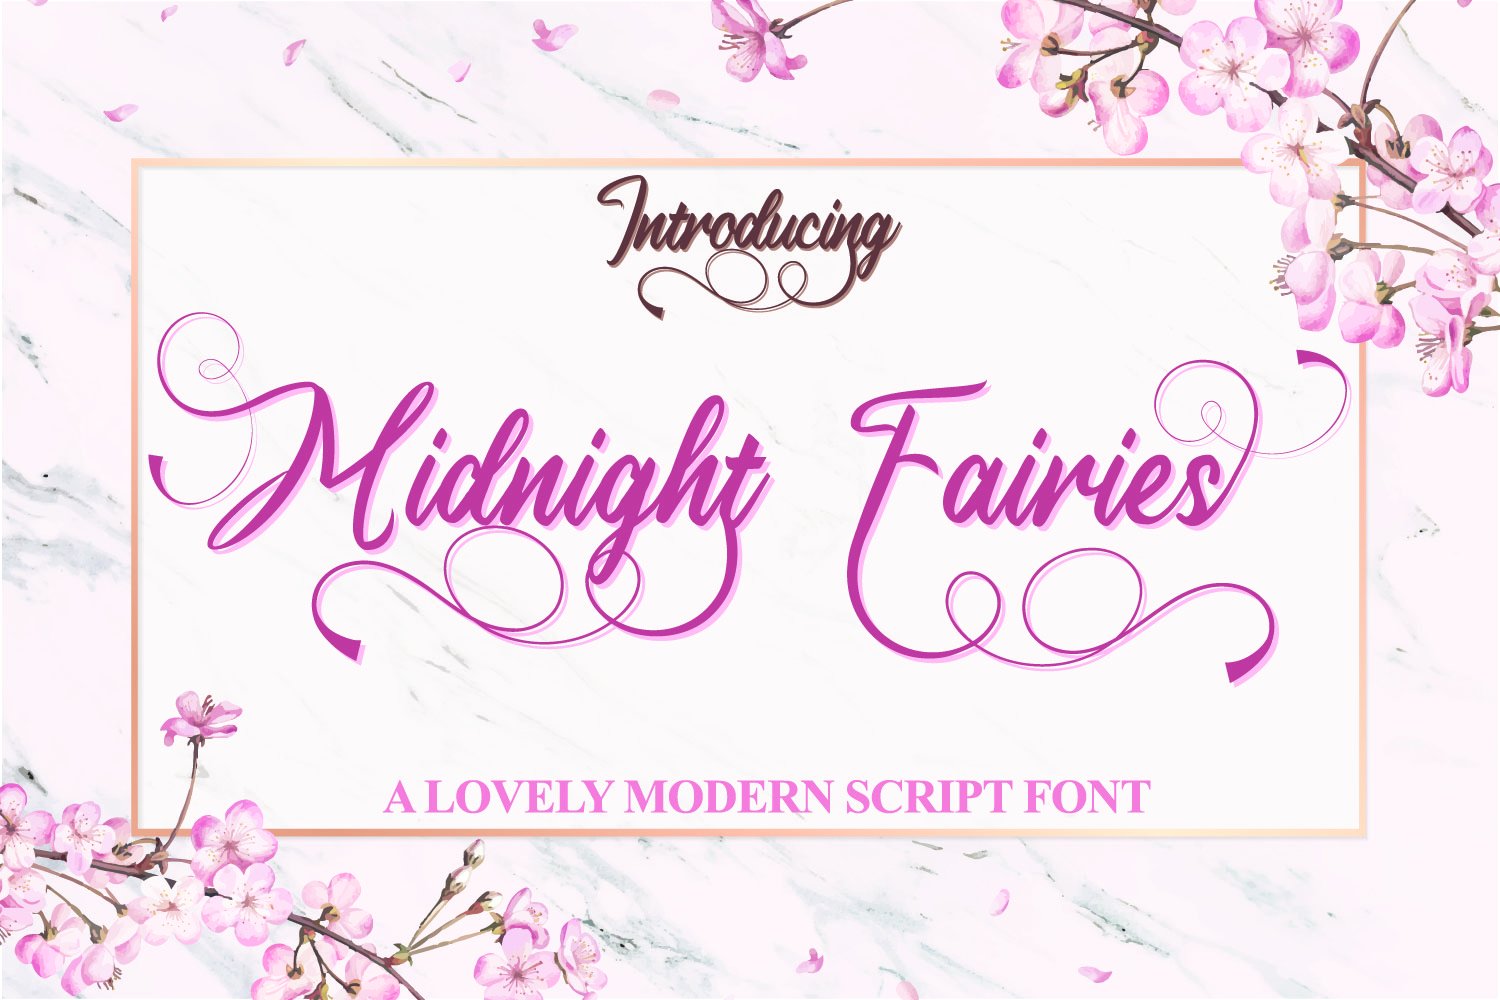 Midnight Fairies | Calligraphy Font cover image.